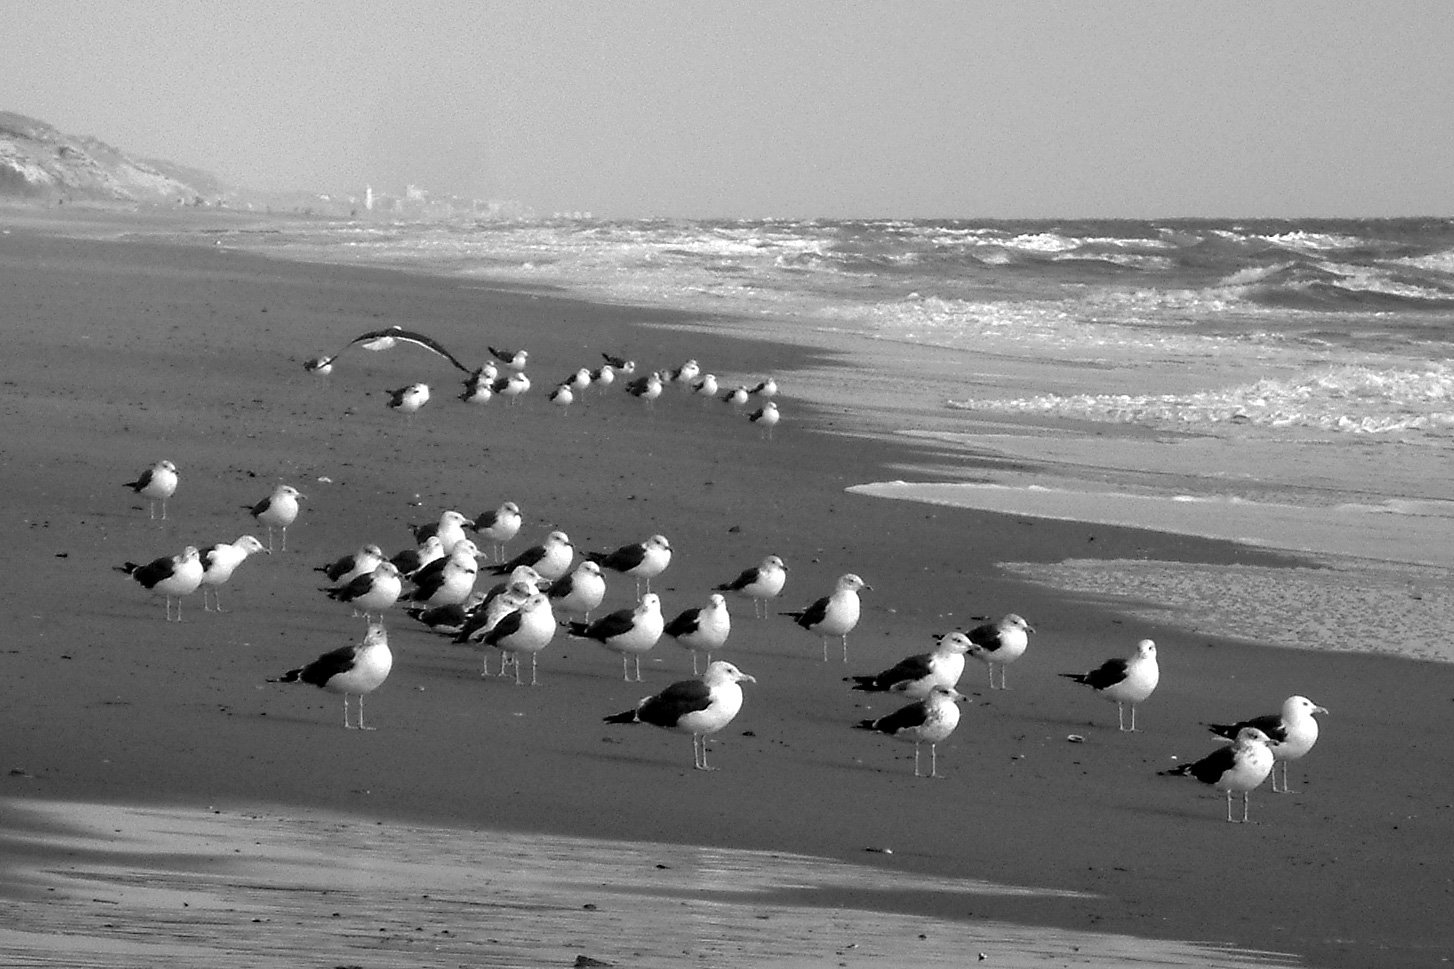 the seagulls are standing in front of each other on the beach